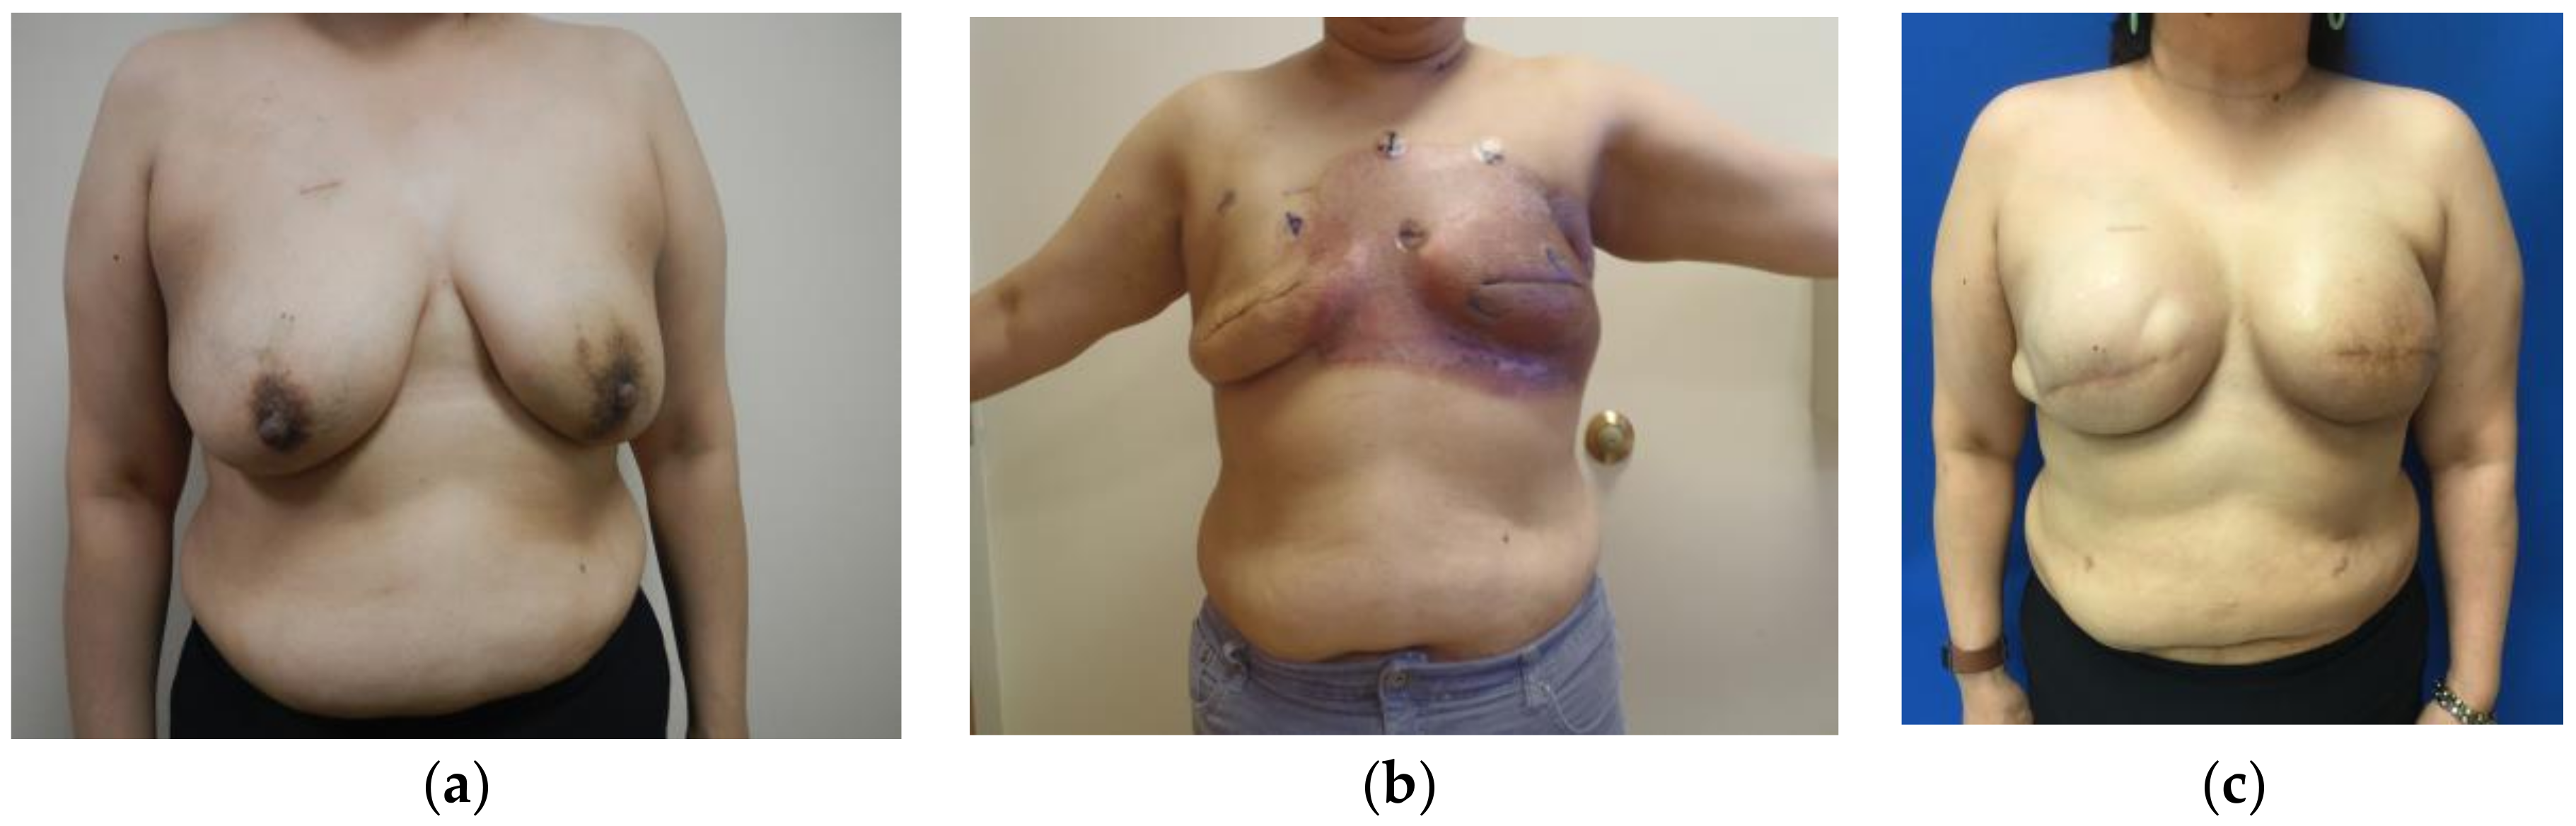 Fat Transfer To Breasts Post-Operative